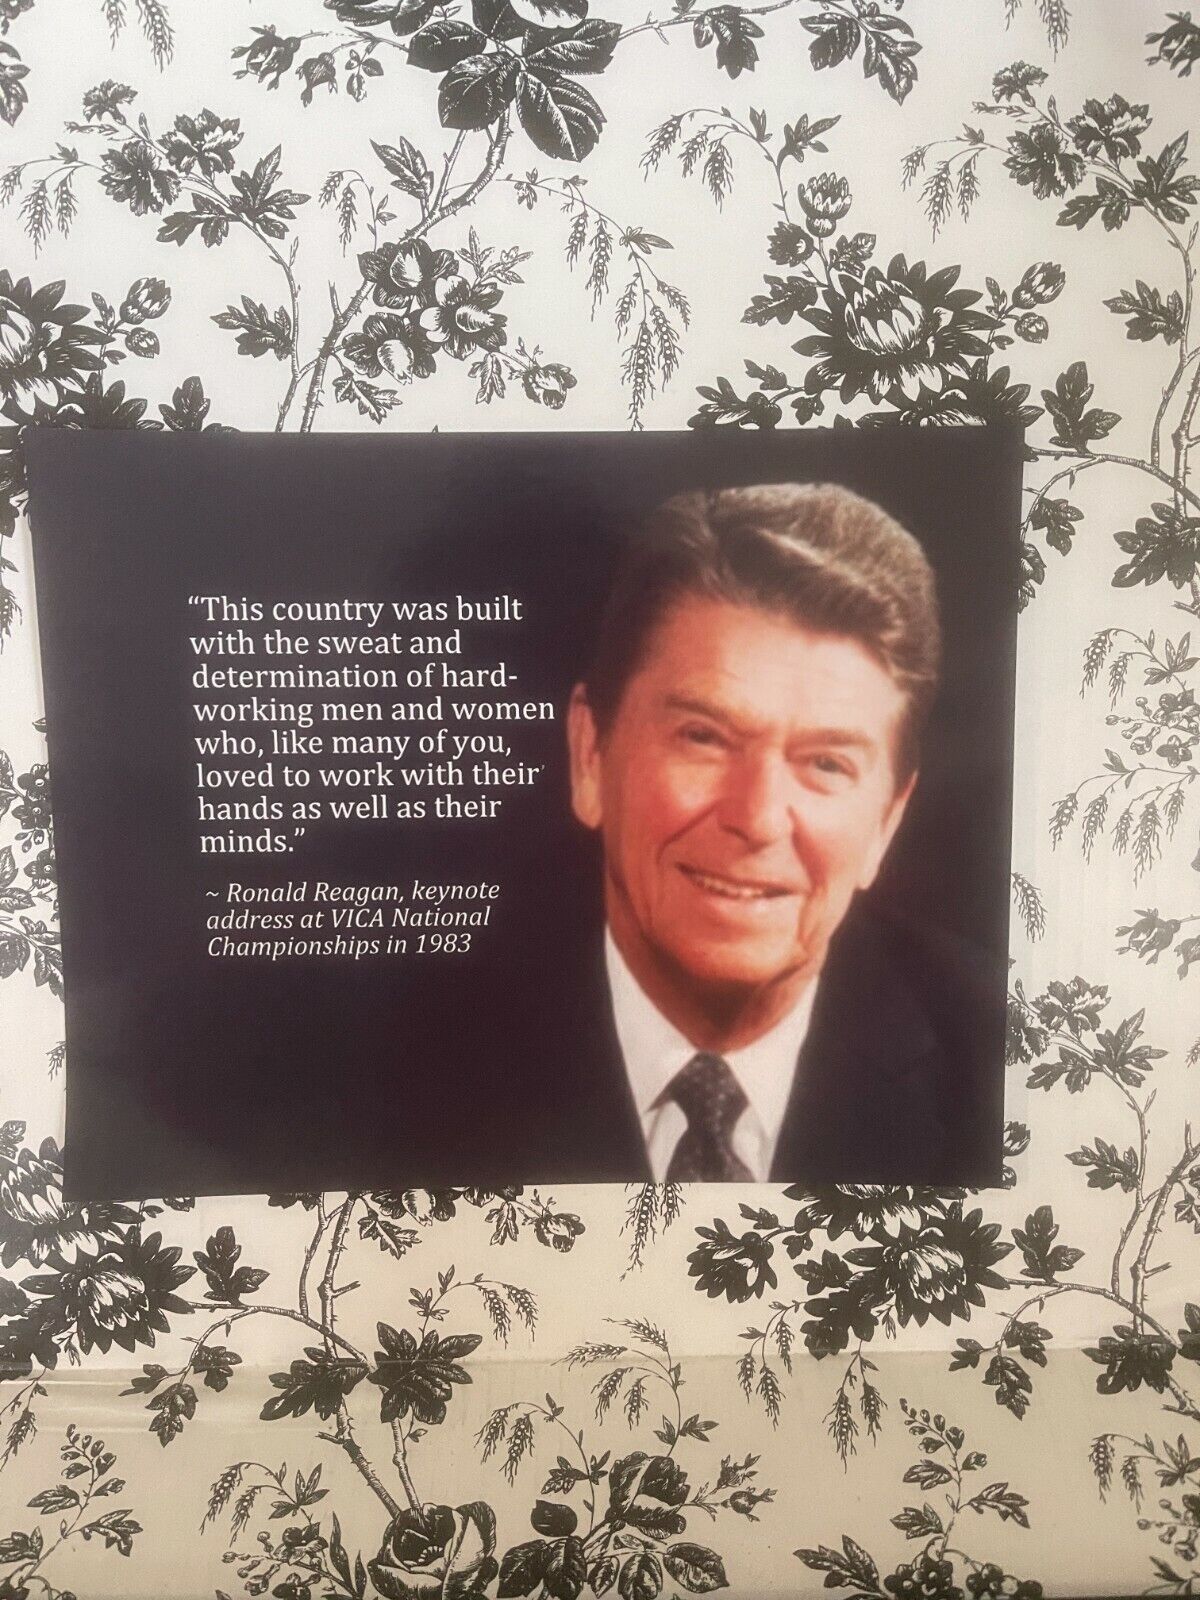 PRESIDENT RONALD REAGAN ON BIRTH OF AMERICA FAMOUS QUOTES PUBLICITY PHOTO